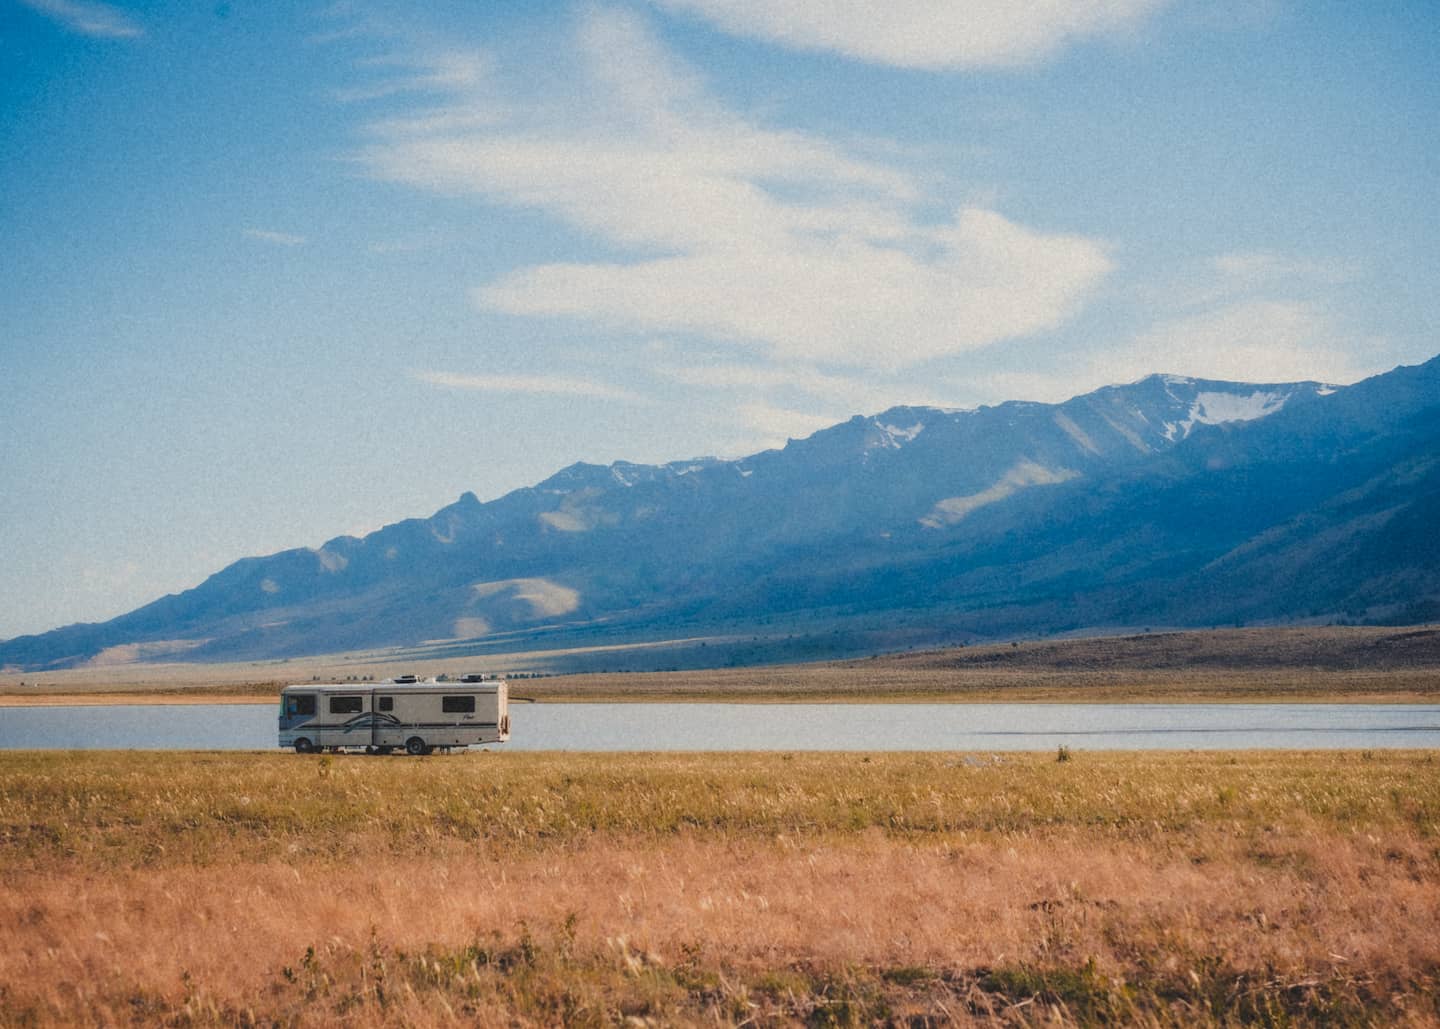 A camper next to a lake in front of mountains